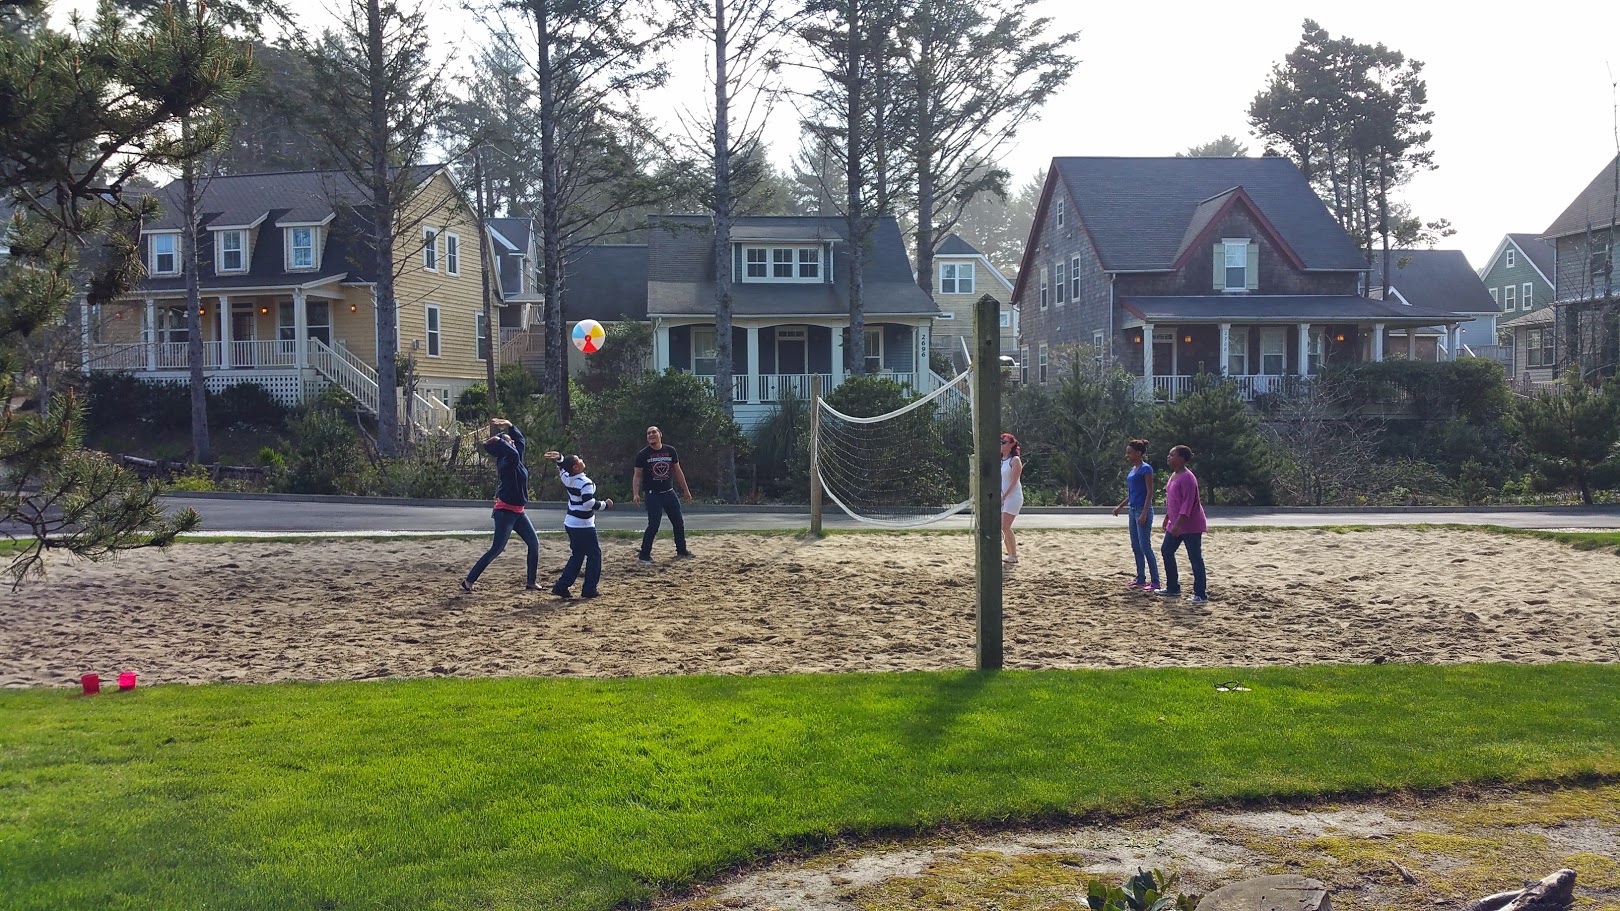 20150412_Volleyball across the street